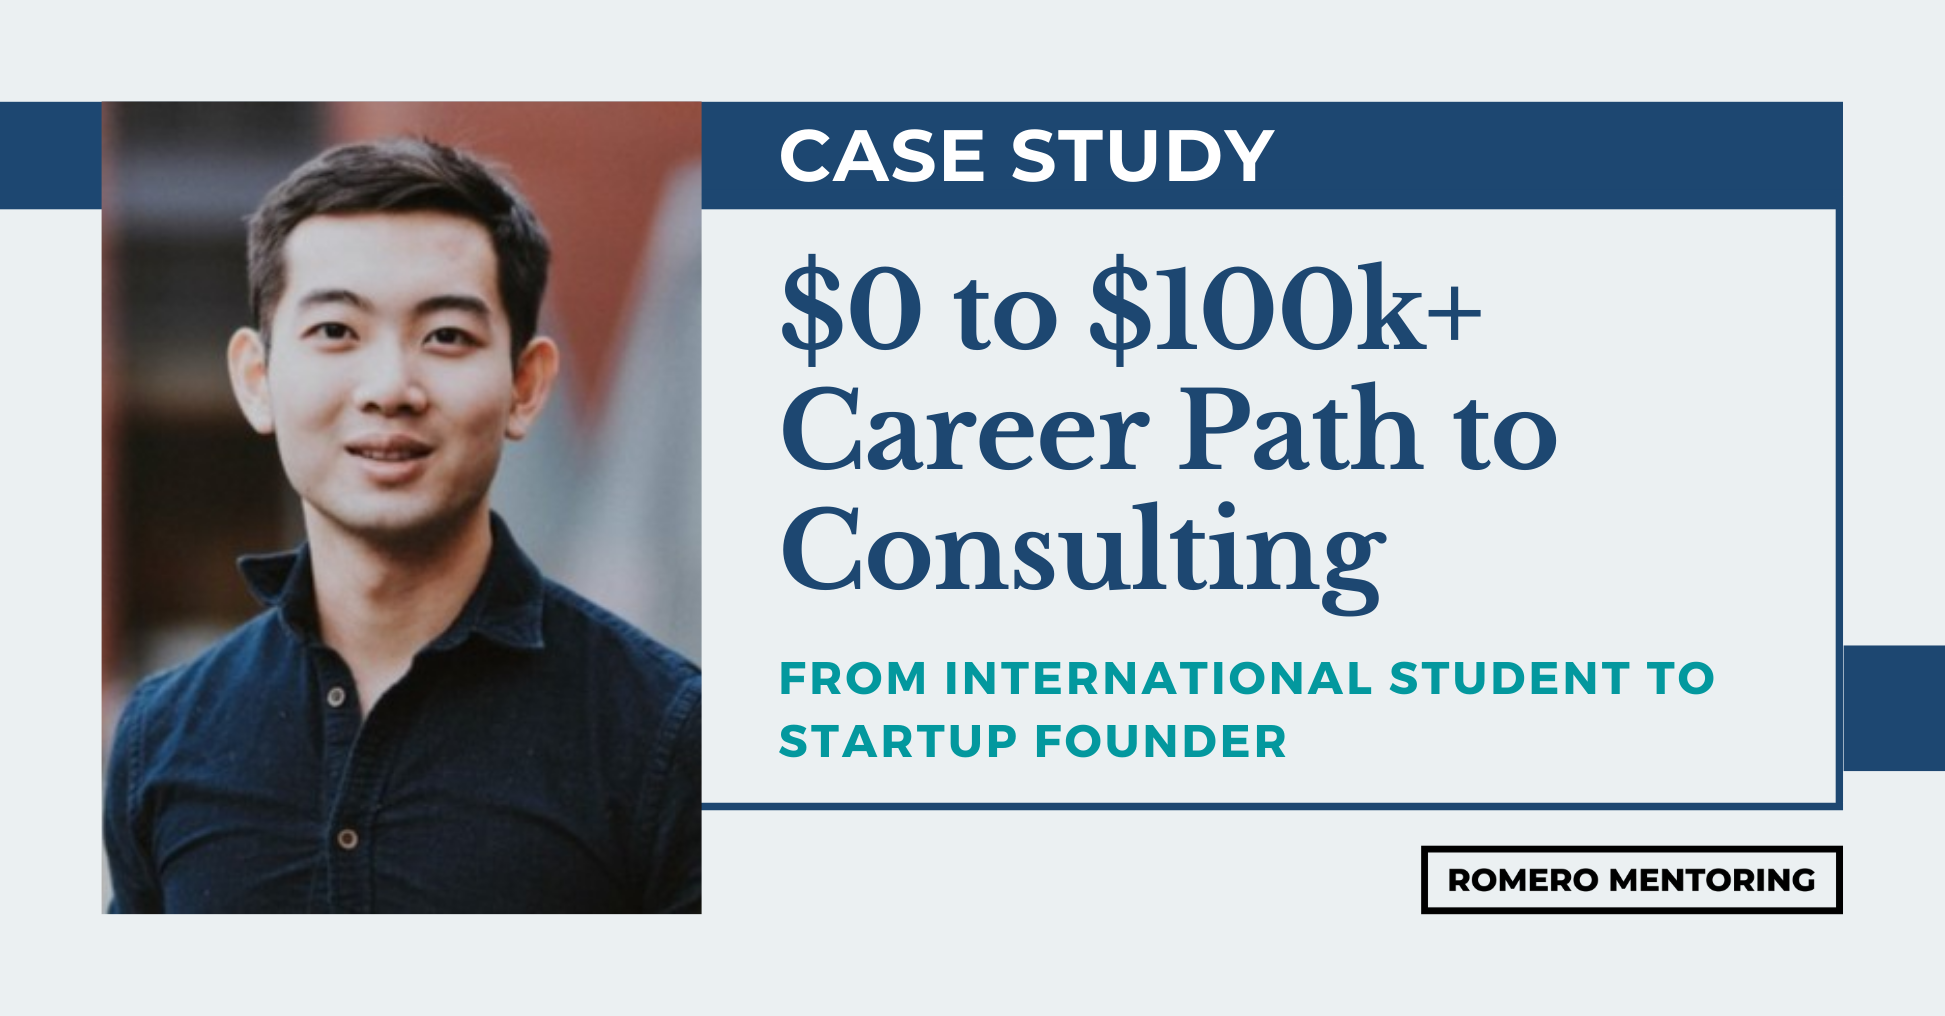 APP Student Goes From $0 to $100k+ Salary; Career Path to Consulting